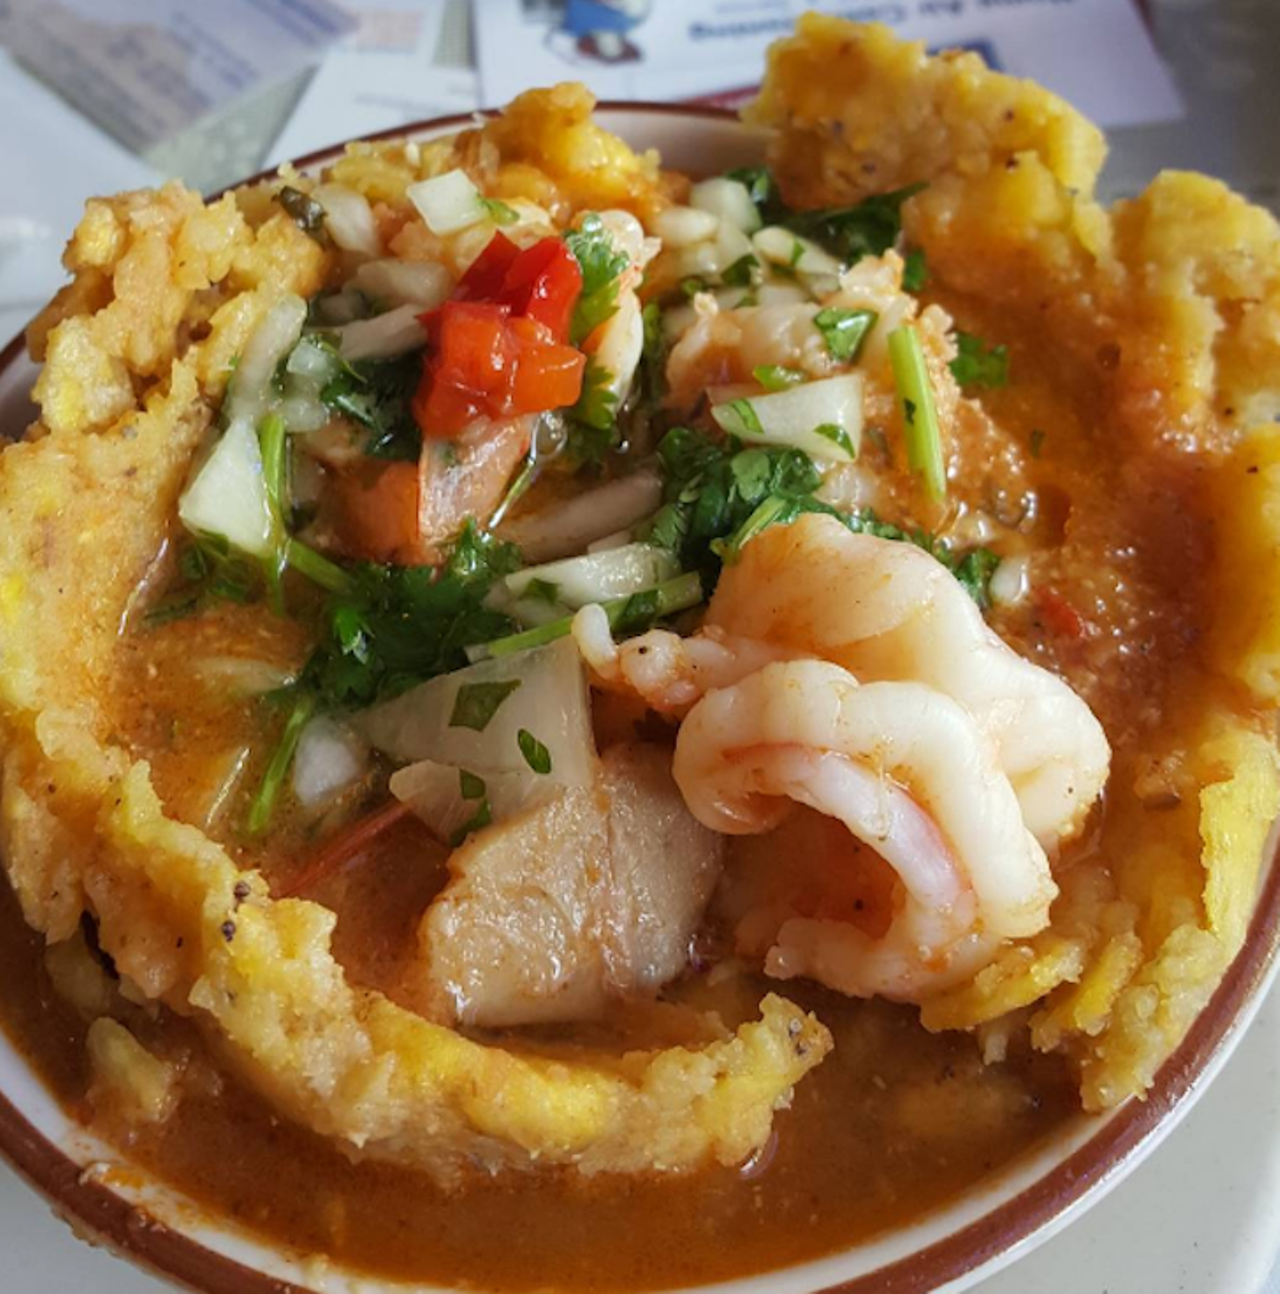 Numero Uno Restaurant
2499 S. Orange Ave. | 407-841-3840
Get your fixing of delicious homemade cuban meals almost like your abuelas. The Lunch specials (available weekdays between 11 a.m. and 3 p.m.) at this longtime Cuban favorite range from $7 to $8 for dishes like picadillo, mofongo con camarones and higado salteado. Don&#146;t worry about space, they got plenty of space for your familia.
Photo via rob148111 /Instagram